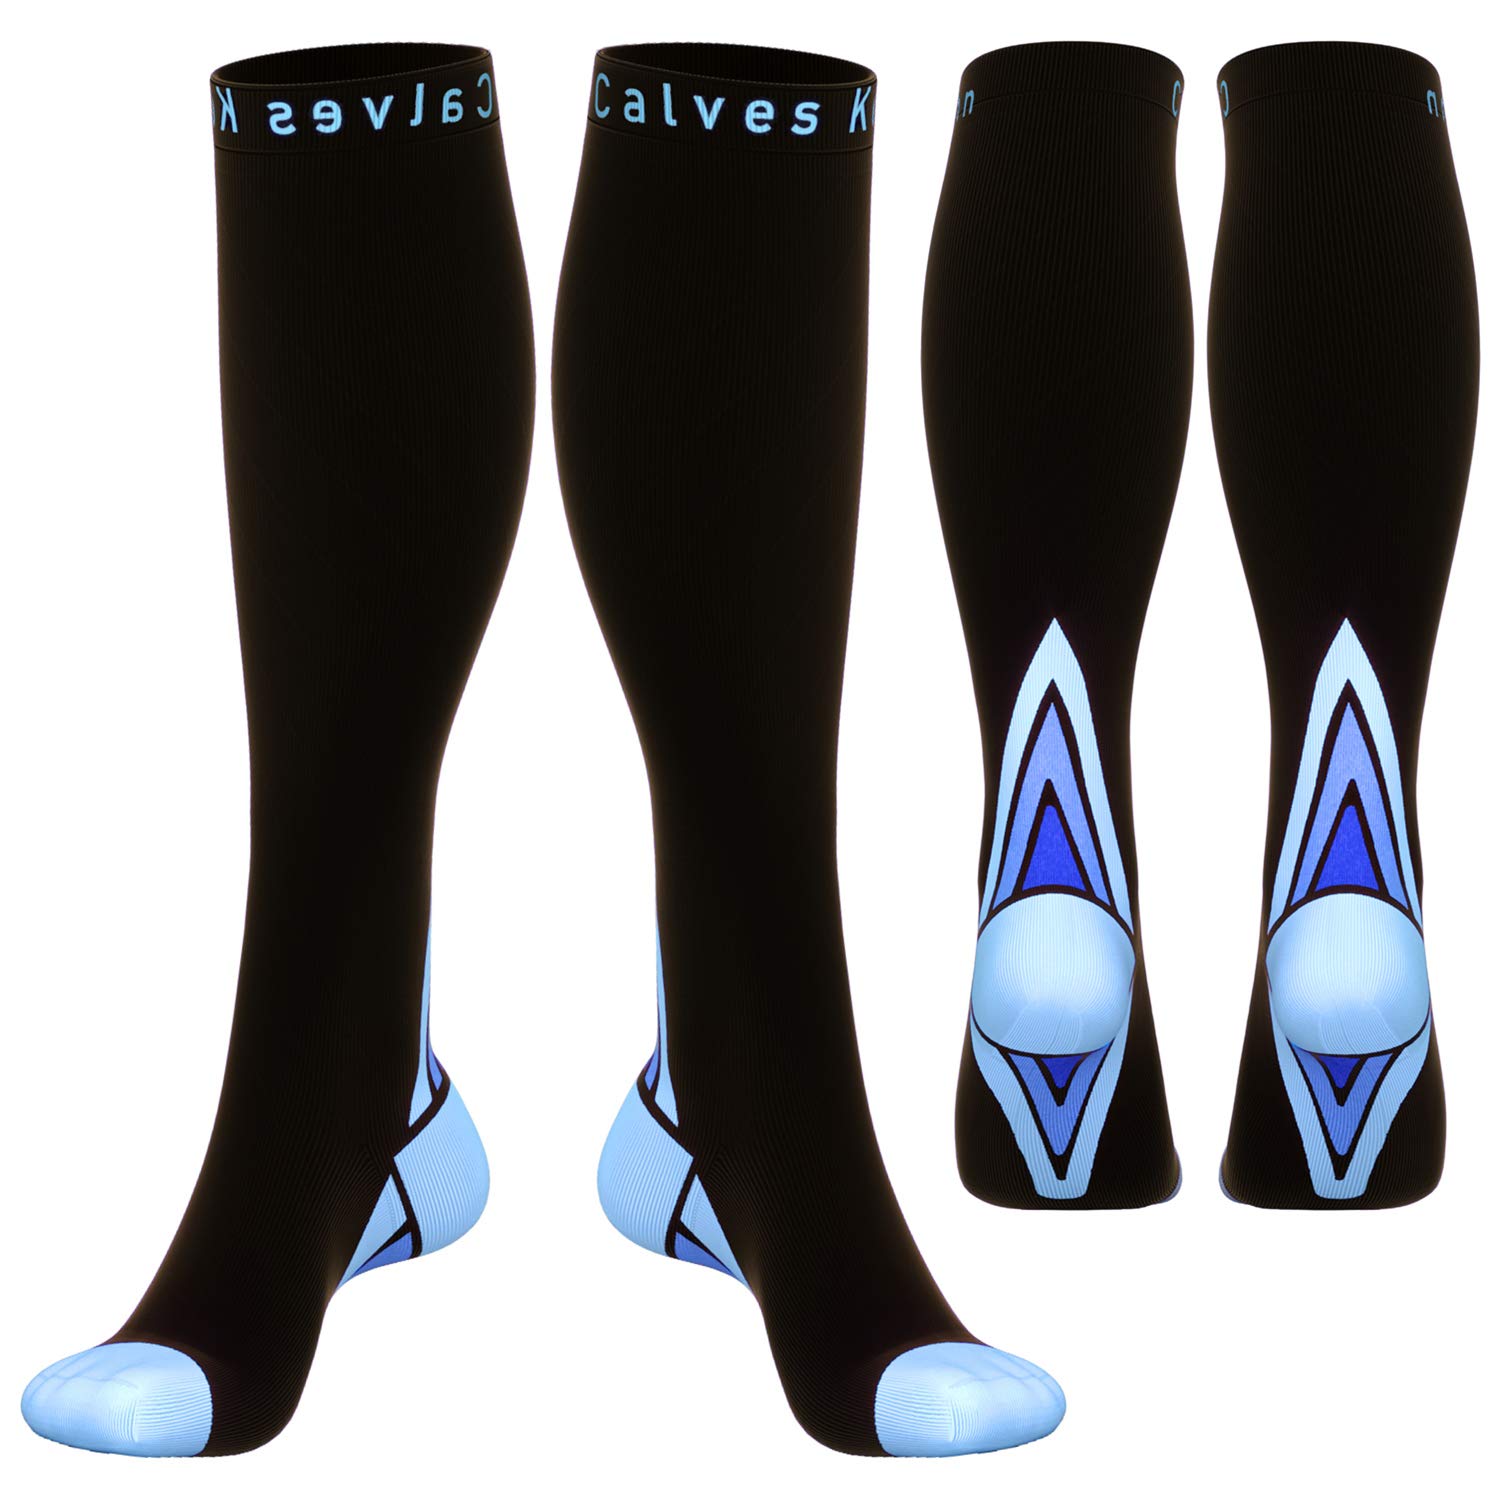 Best Compression Socks: Enhance Circulation and Comfort – Physix Gear Sport